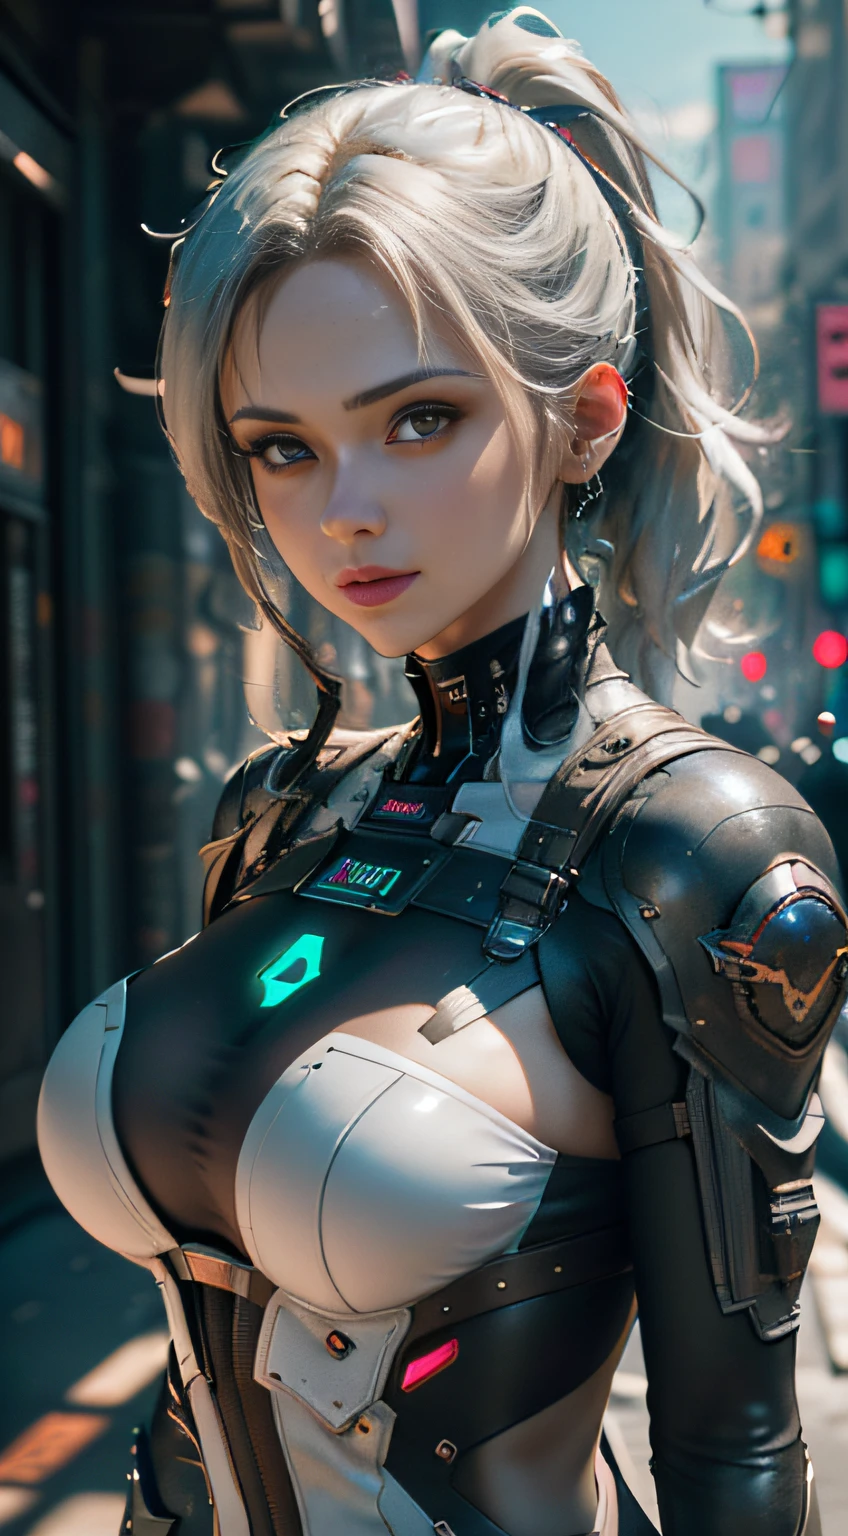 (Best Quality), ((Masterpiece), (Detail: 1.4), 3D, A Beautiful Cyberpunk Woman, HDR (High Dynamic Range), Ray Tracing, NVIDIA RTX, Super-Resolution, Unreal 5, Subsurface Scattering, PBR Textures, Post-Processing, Anisotropic Filtering, Depth of Field, Maximum Sharpness and Clarity, Multi-layer Textures, Albedo and Highlight Maps, Surface Shading, Accurate simulation of light-material interactions, perfect proportions, Octane Render, two-color light, large aperture, low ISO, white balance, rule of thirds, 8K RAW